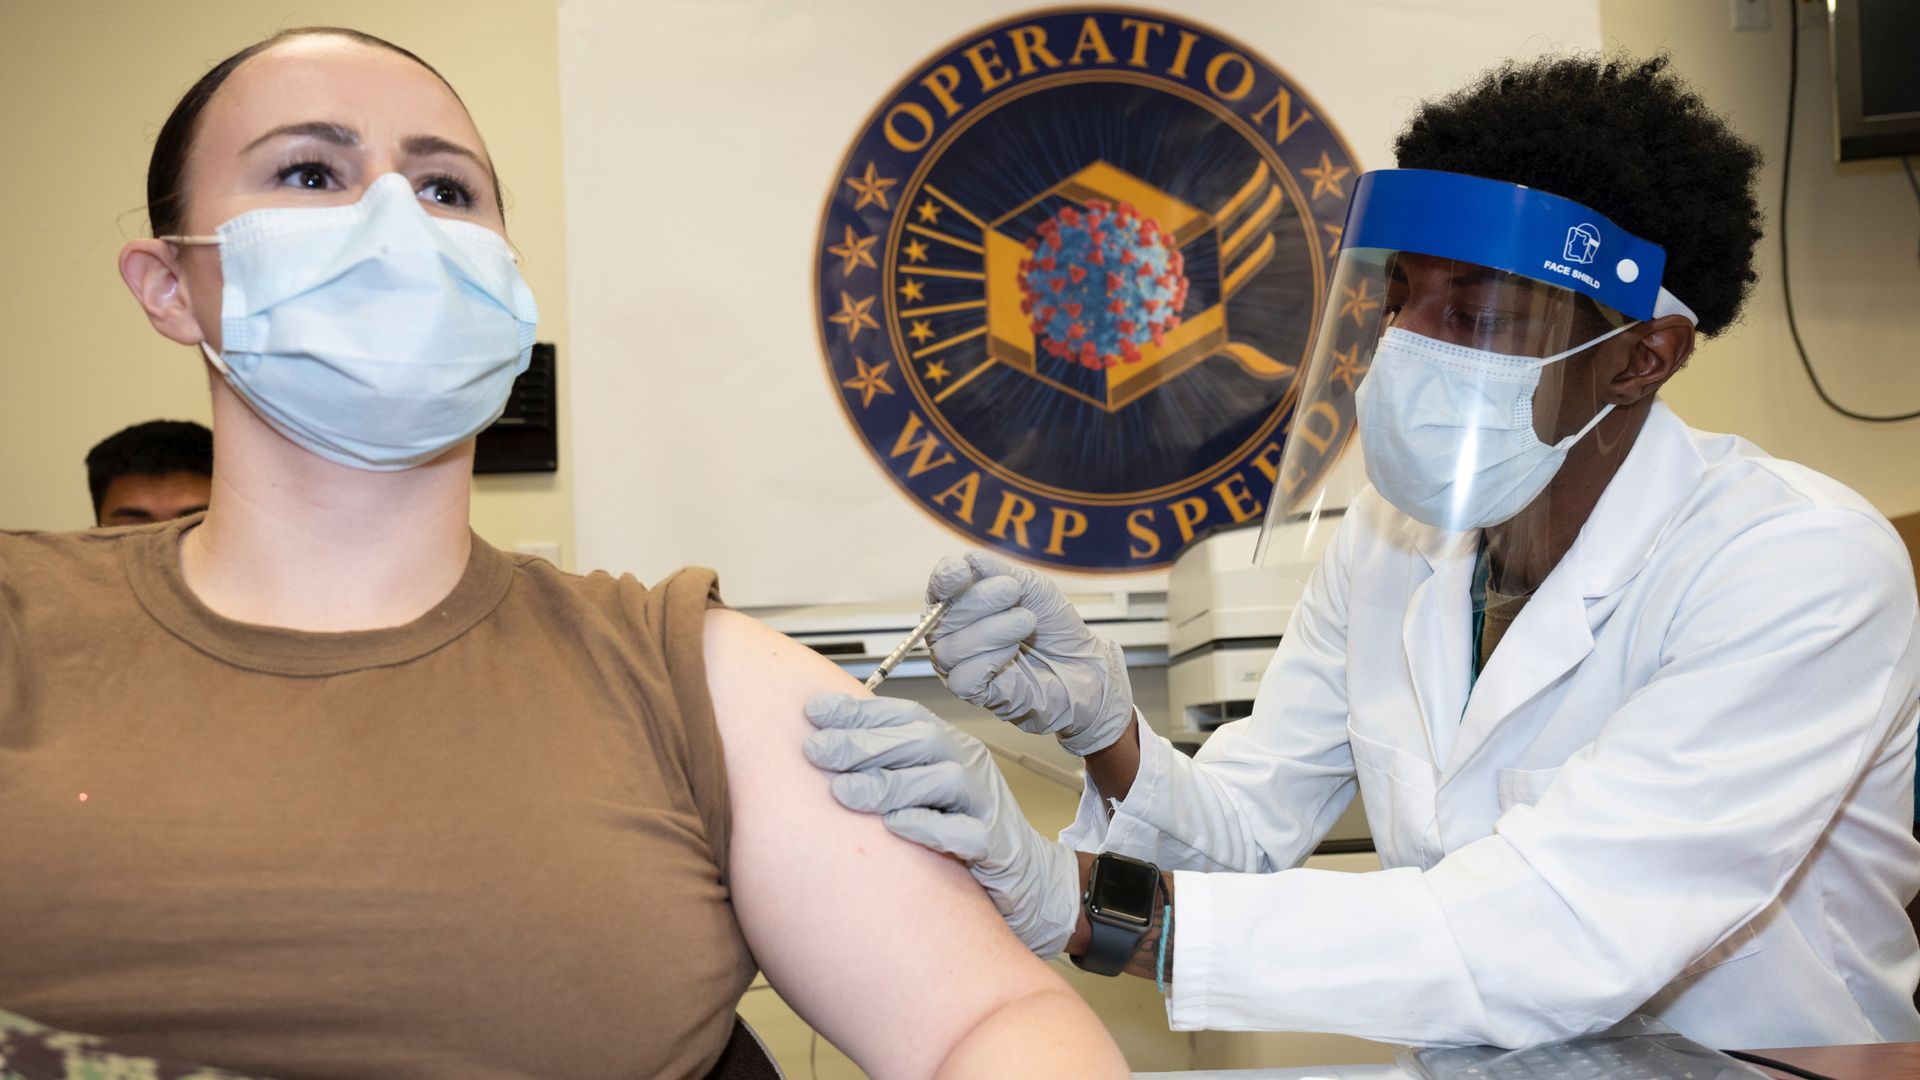 A Navy Petty Officerreceives a COVID-19 vaccination, Walter Reed National Military Medical Center, Bethesda, Md., Dec. 14, 2020. 